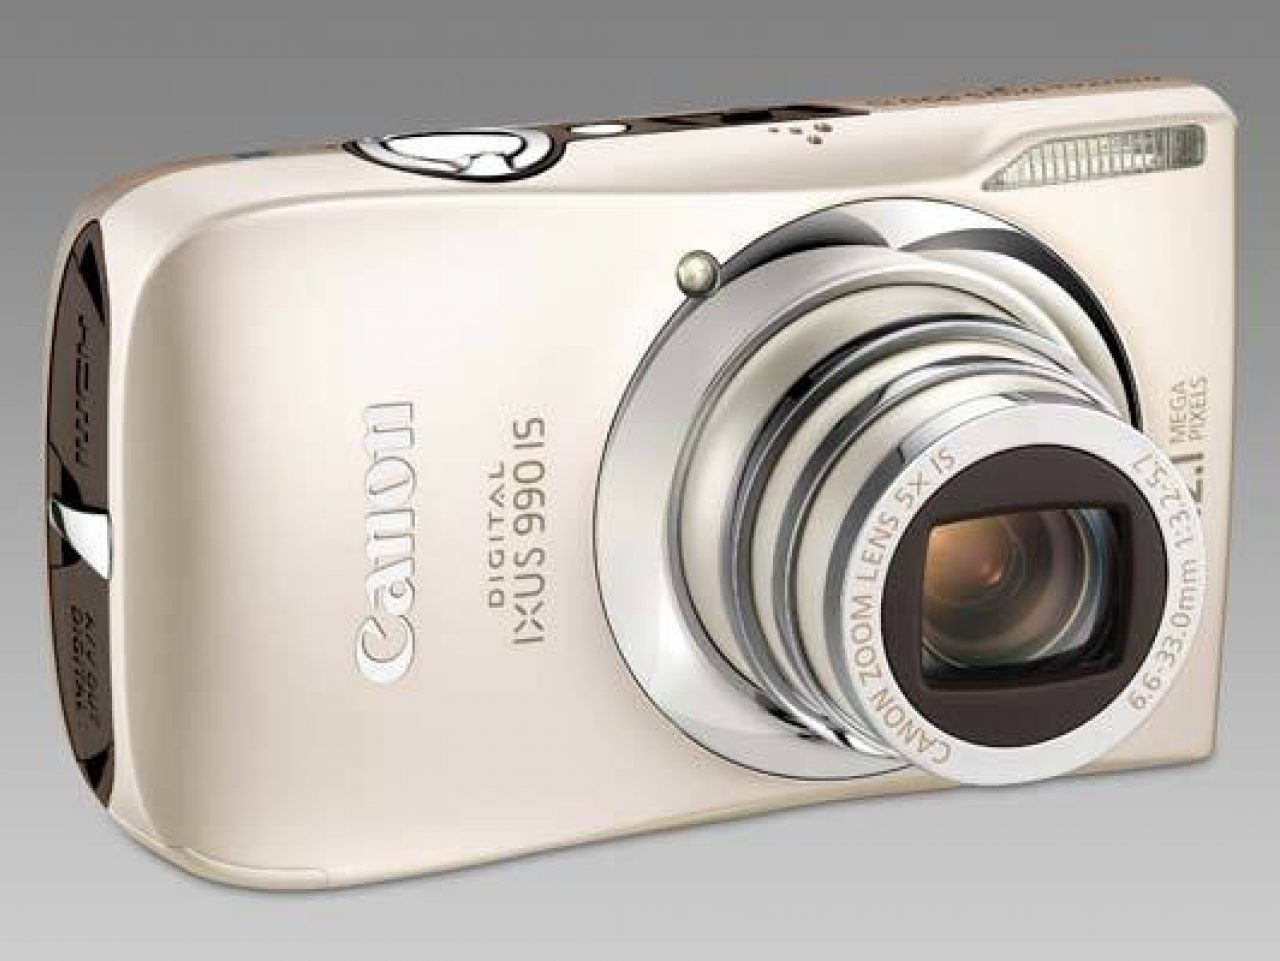 IS THIS THE BEST CAMERA UNDER £20? Canon Ixus 100 IS Digicam Full Review! 